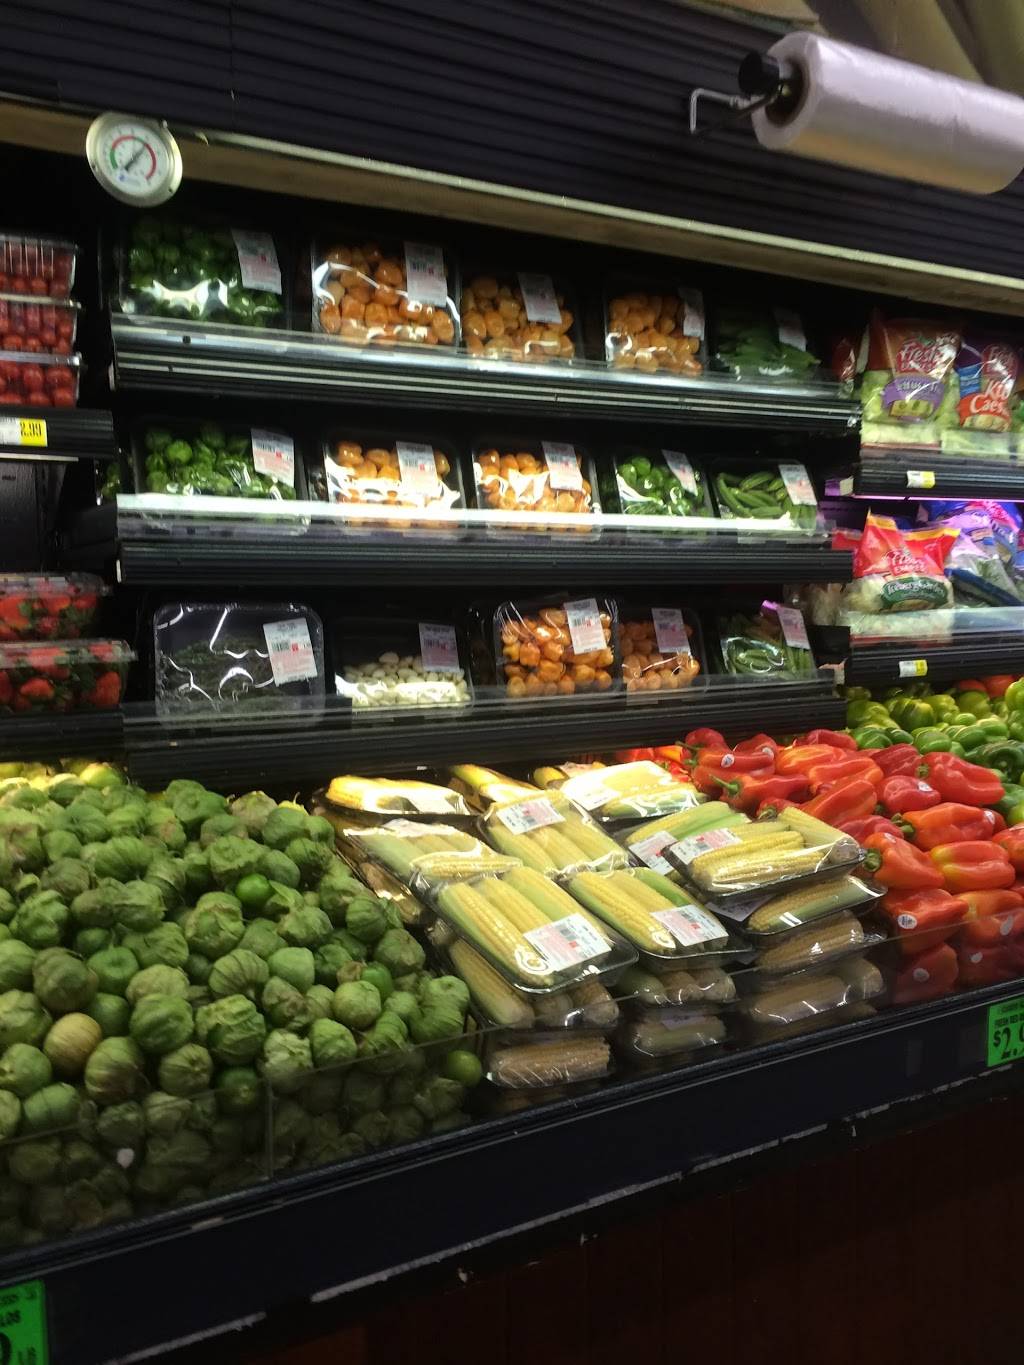 Compare Foods Supermarket | 4300 N Tryon St, Charlotte, NC 28213, USA | Phone: (704) 596-3495